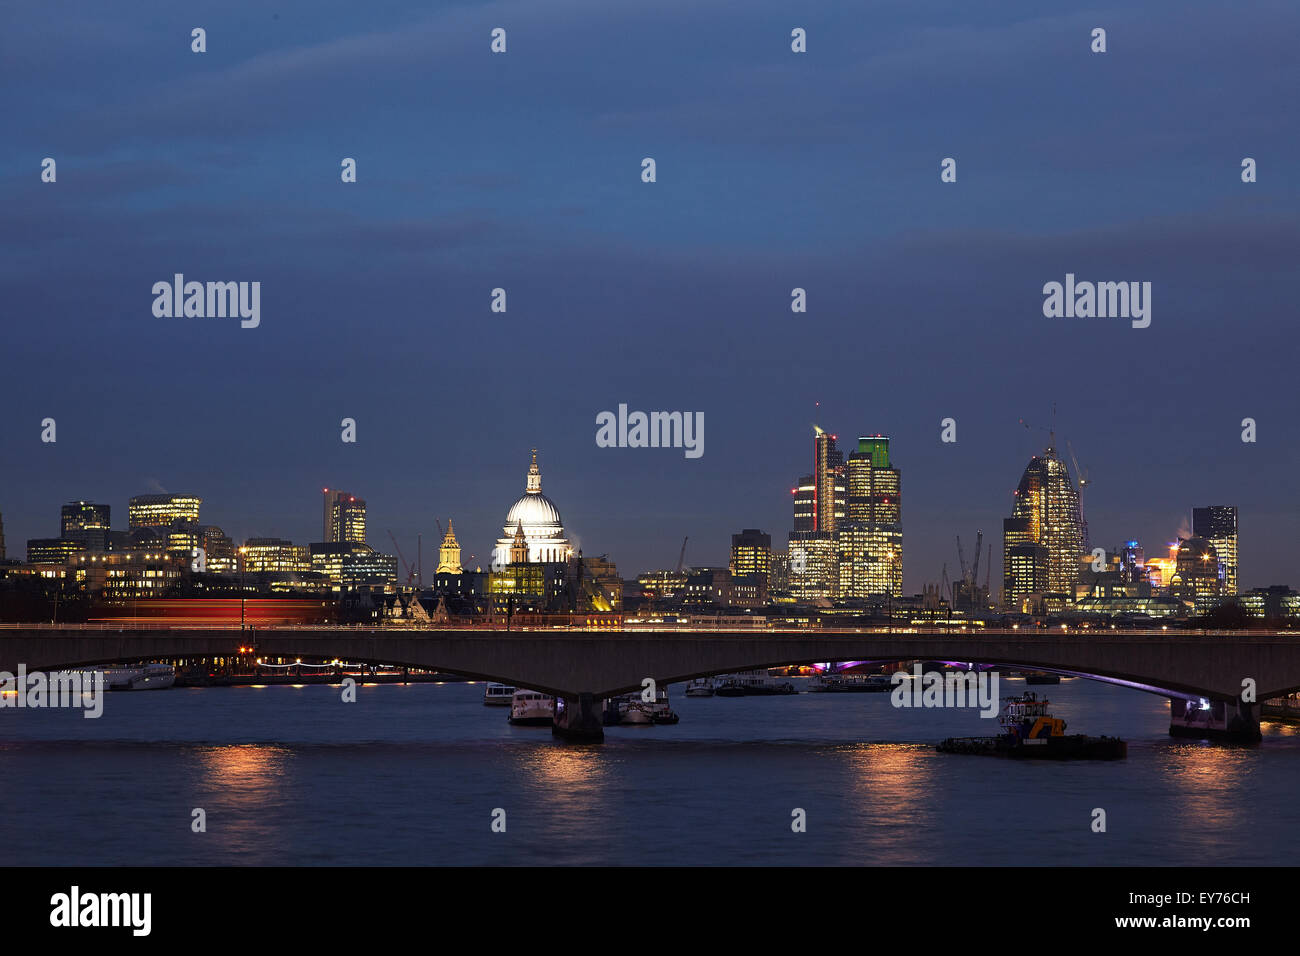 Night scene of the river Thames looking over Waterloo bridge and on to St Pauls and the City of London Stock Photo